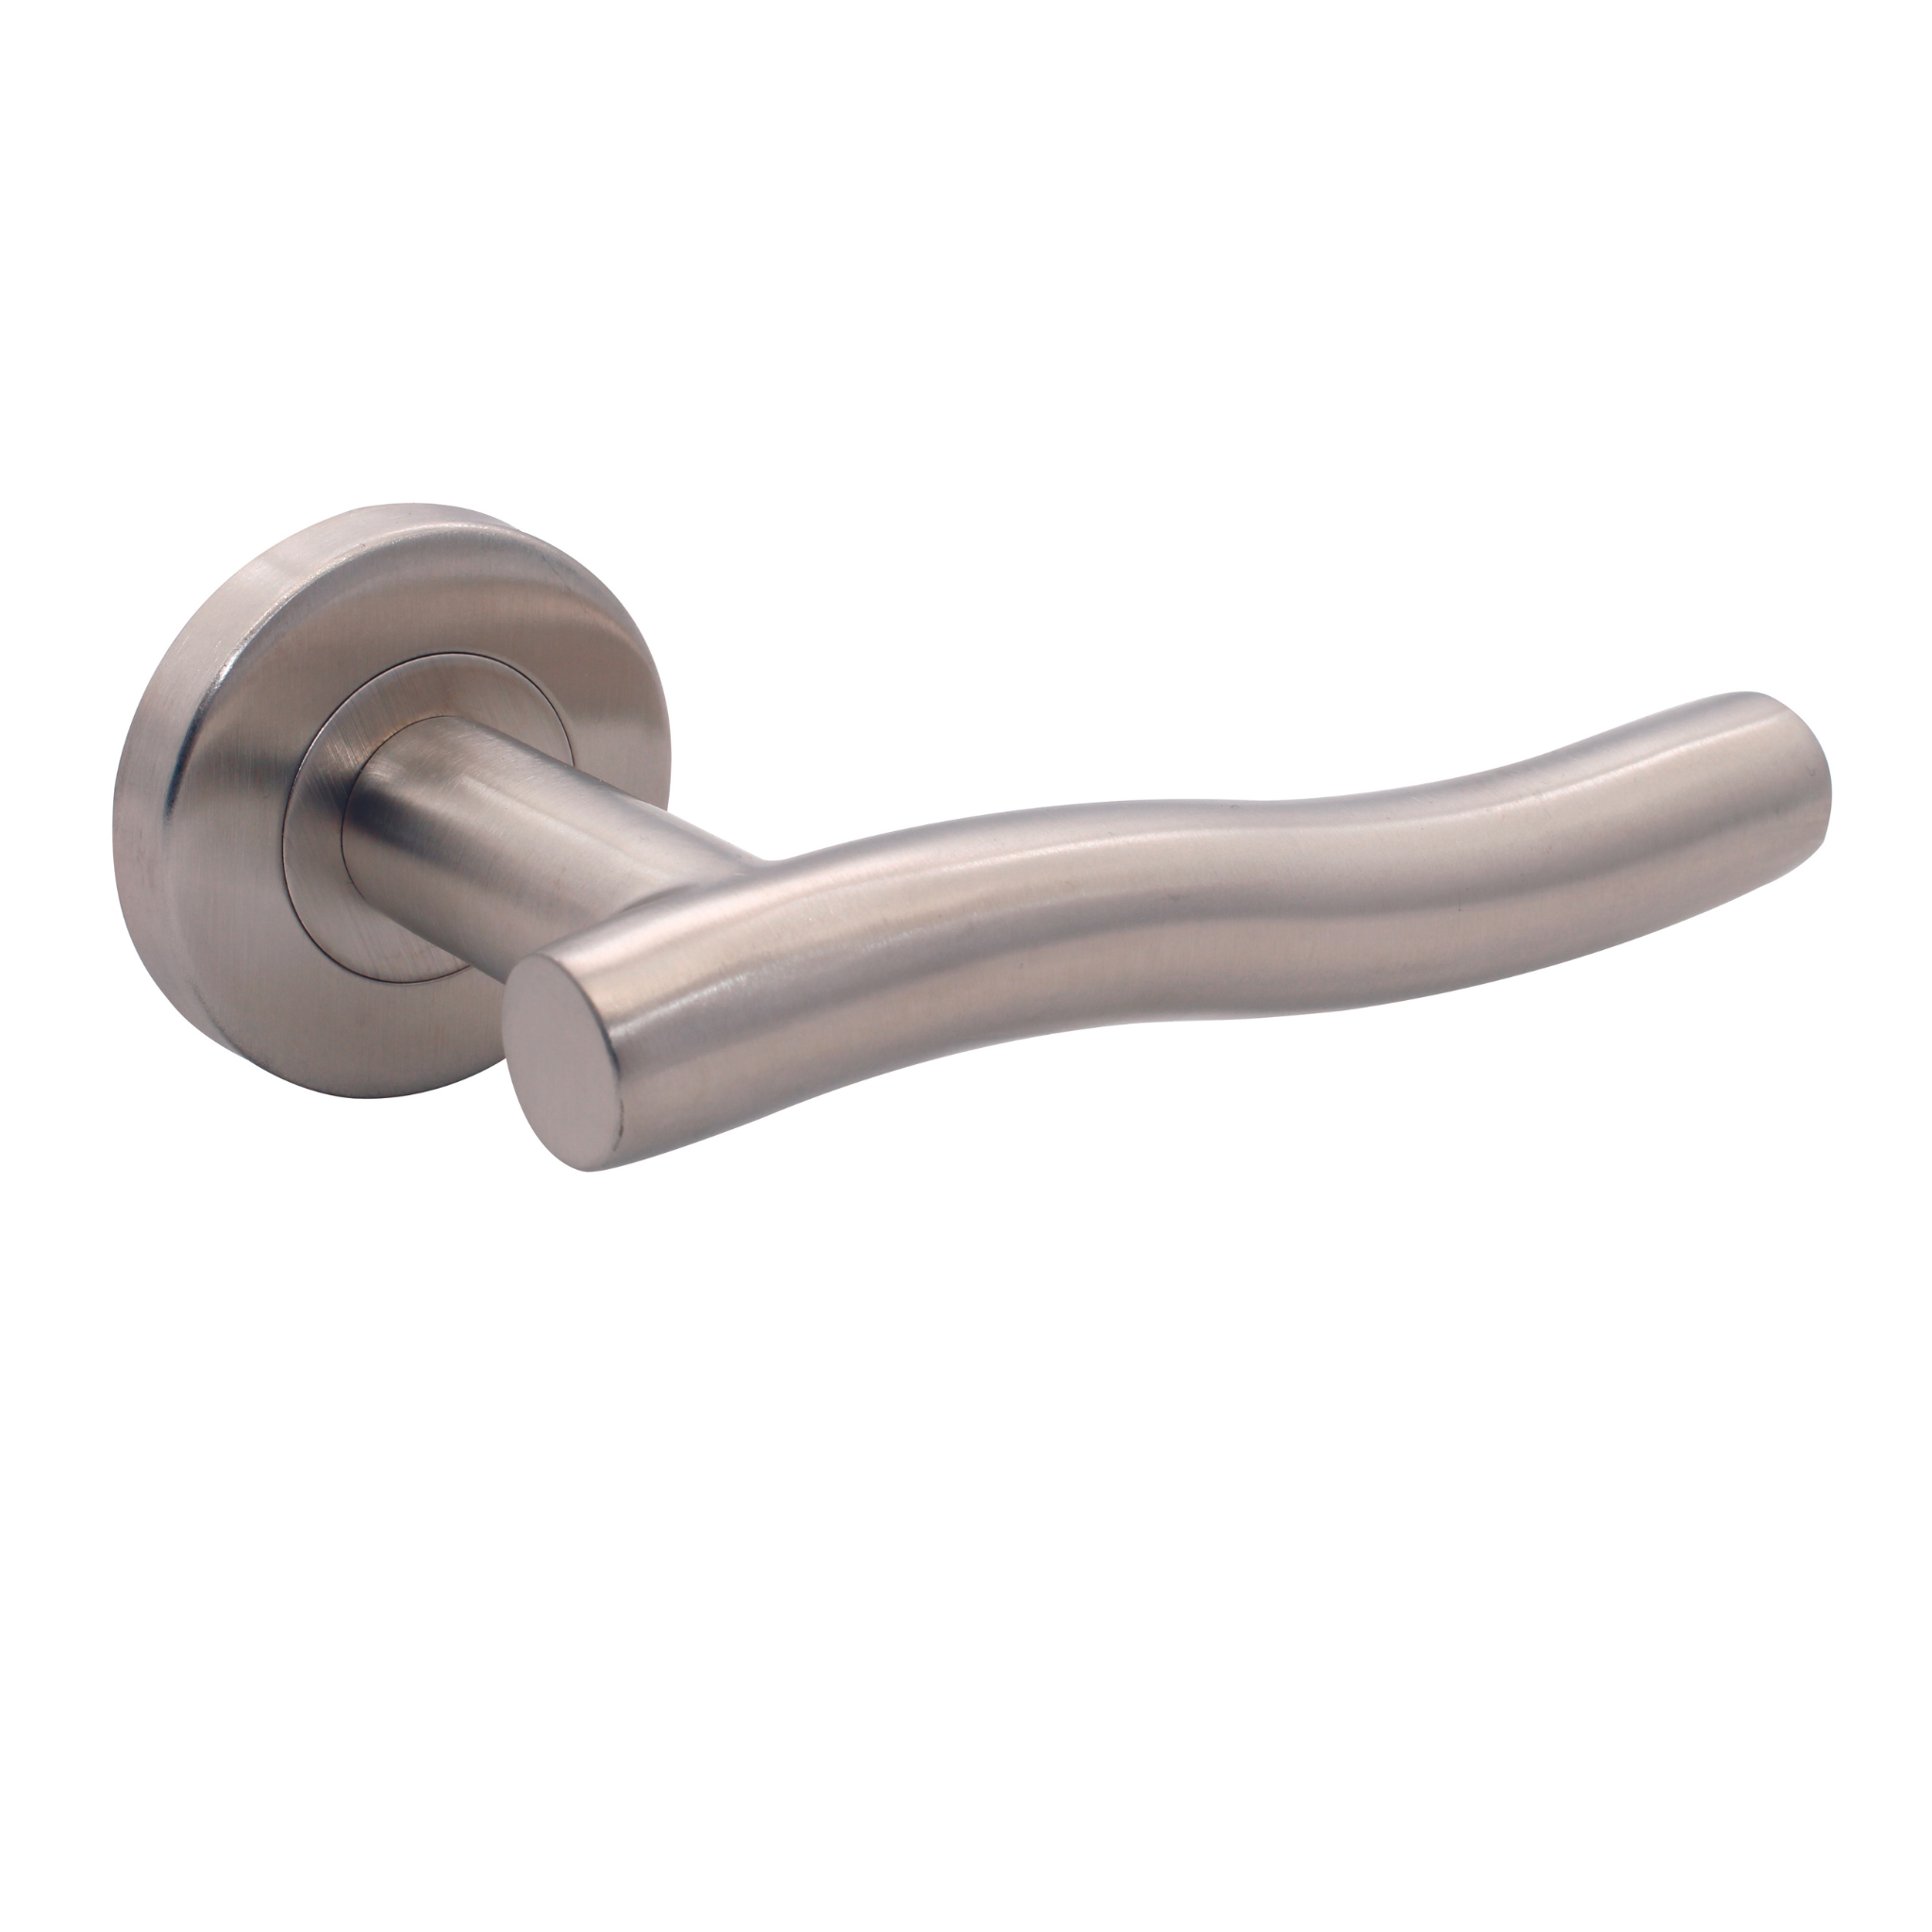 FT14.R._.SS, Lever Handles, Tubular, On Round Rose, With Escutcheons, Stainless Steel, CISA